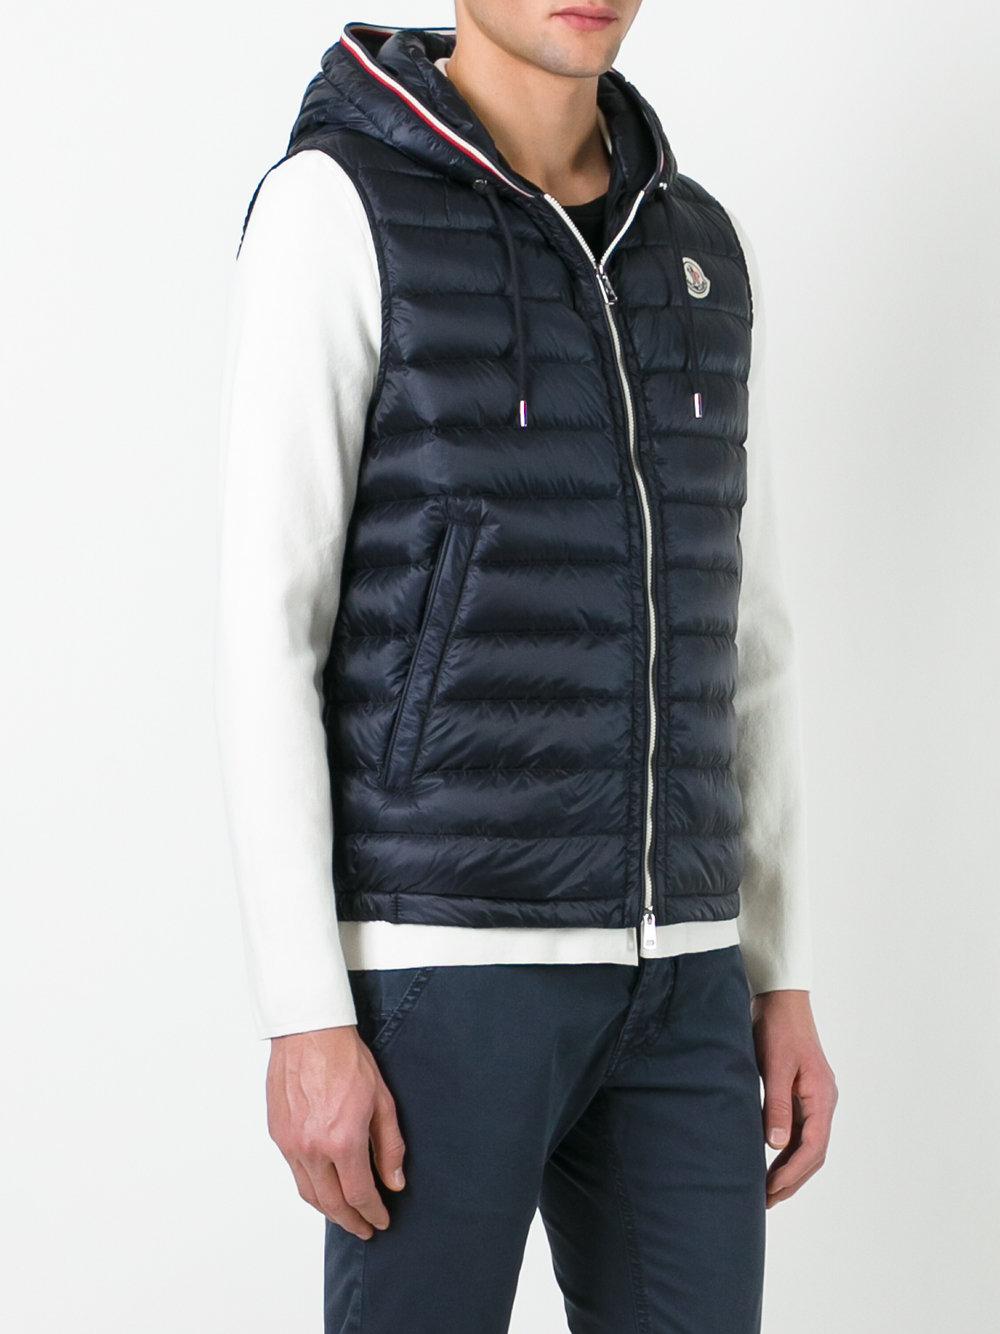 Moncler Synthetic Cyriaque Padded Gilet in Blue for Men - Lyst